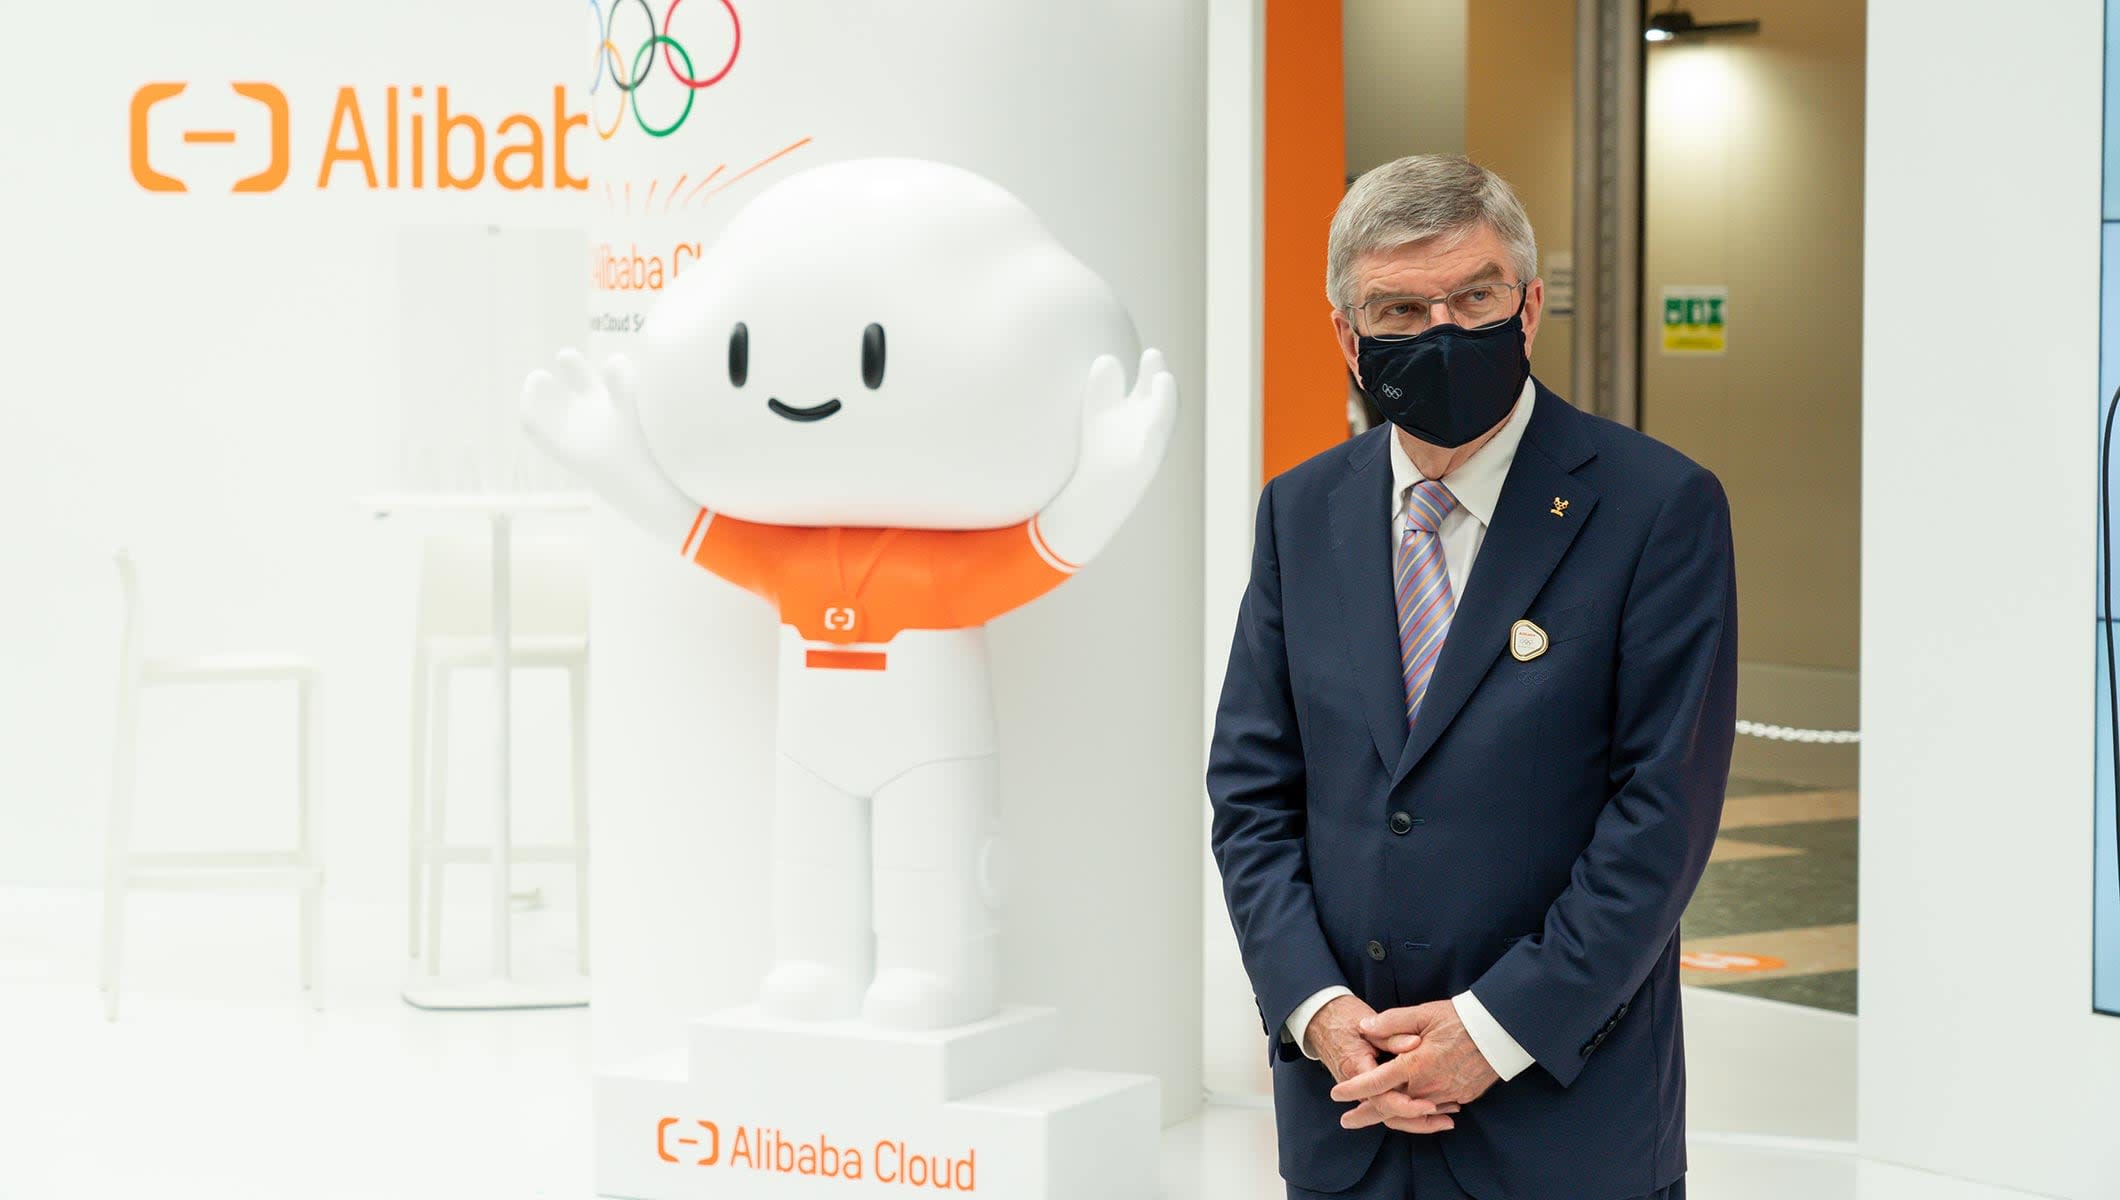 The Alibaba Showcasing at the IBC in Tokyo ahead of TOKYO 2020